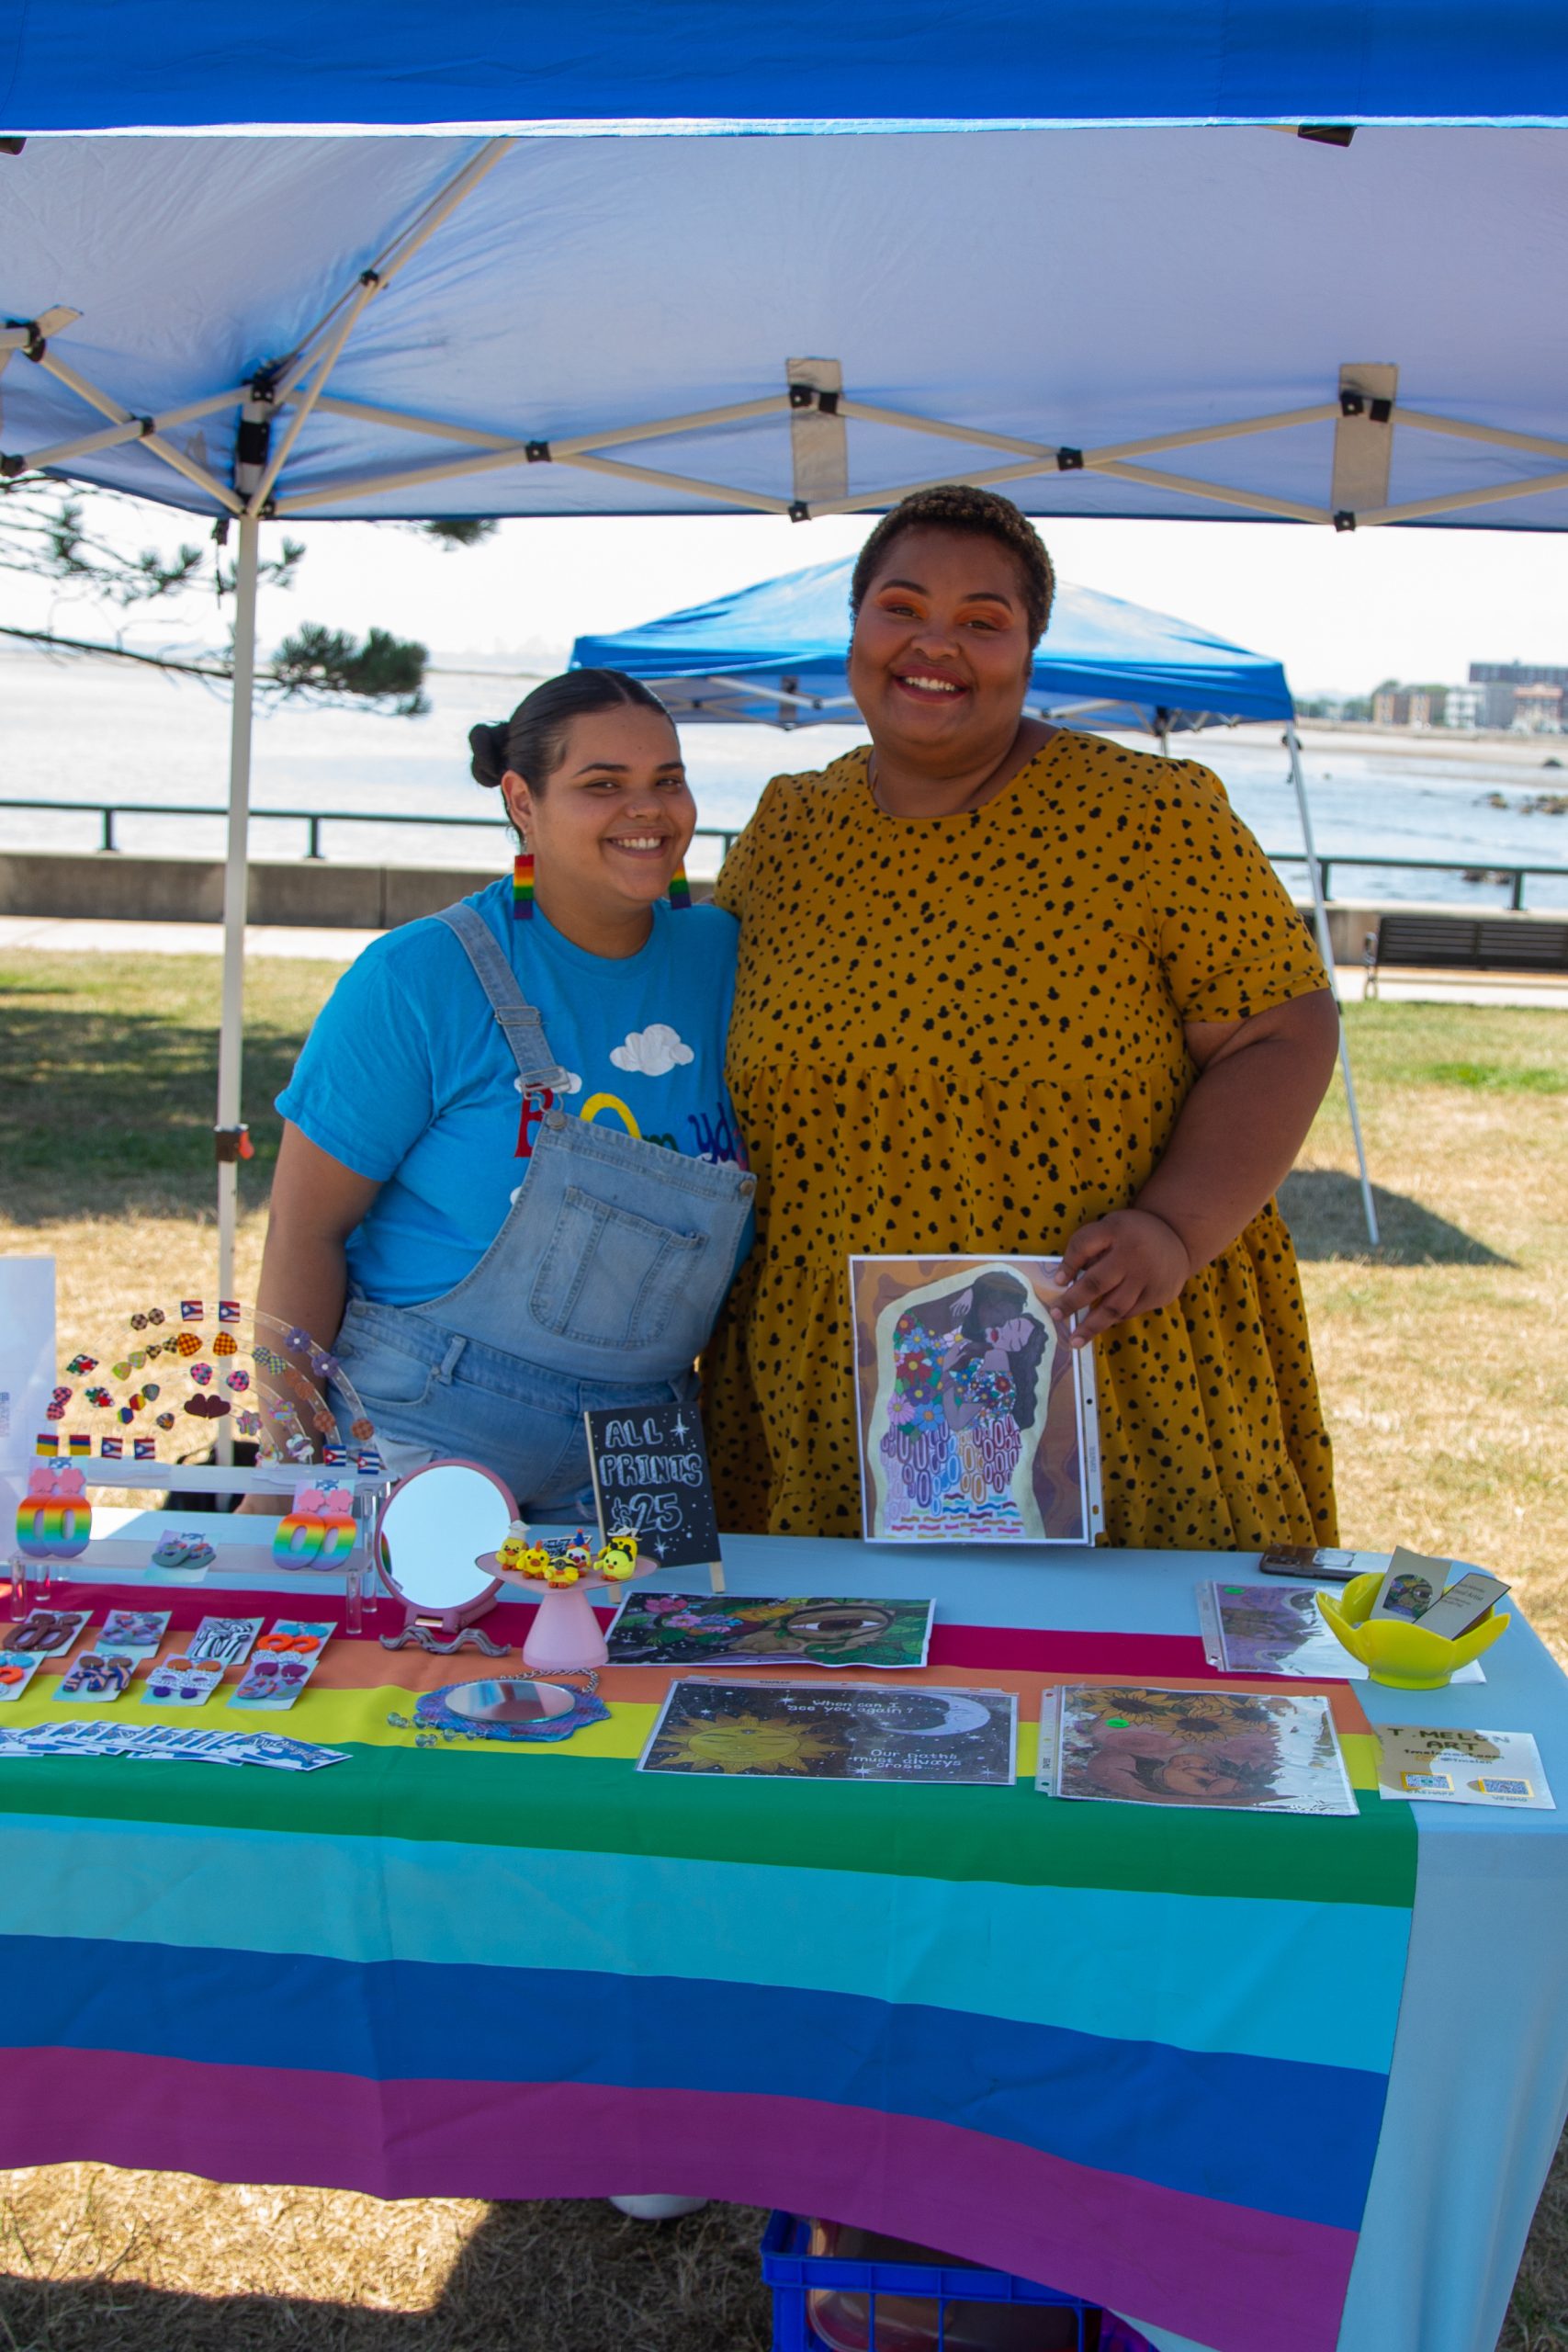 two femme people stand behind a table full of fun rainbow products. The latinx human on the left has black hair in buns and is wearing a blue t-shirt and overalls. The human on the right is black and wears a polkadotted yellow dress. 